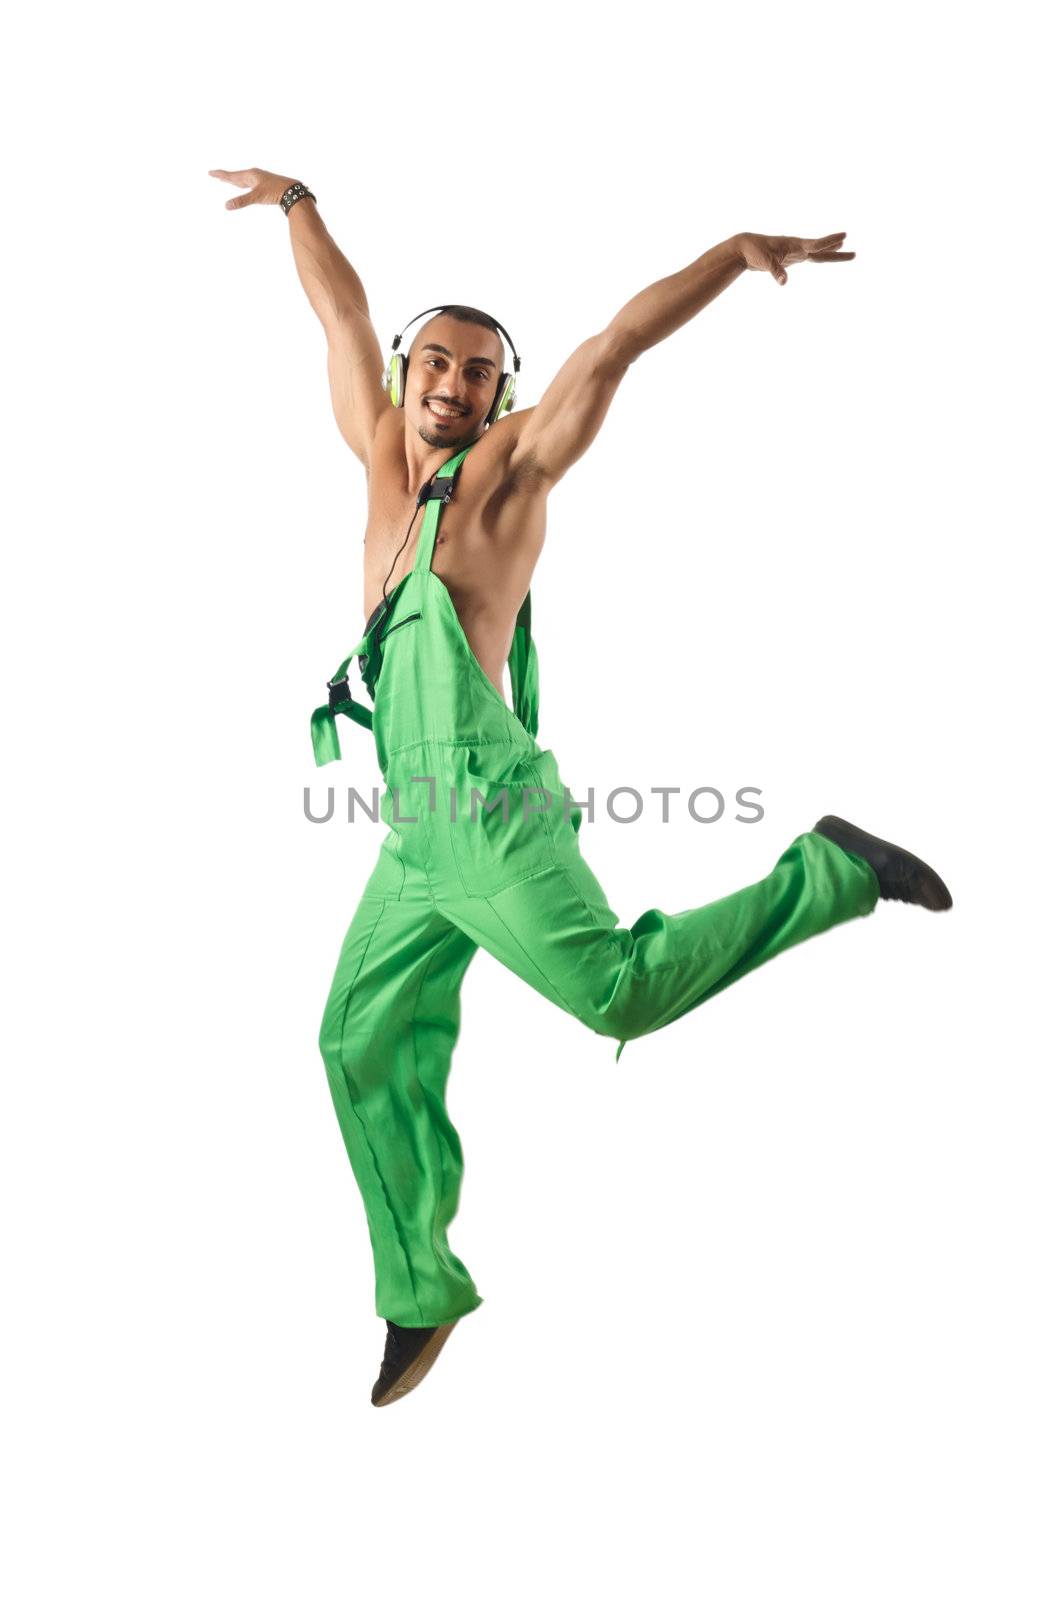 Construction worker jumping and dancing by Elnur